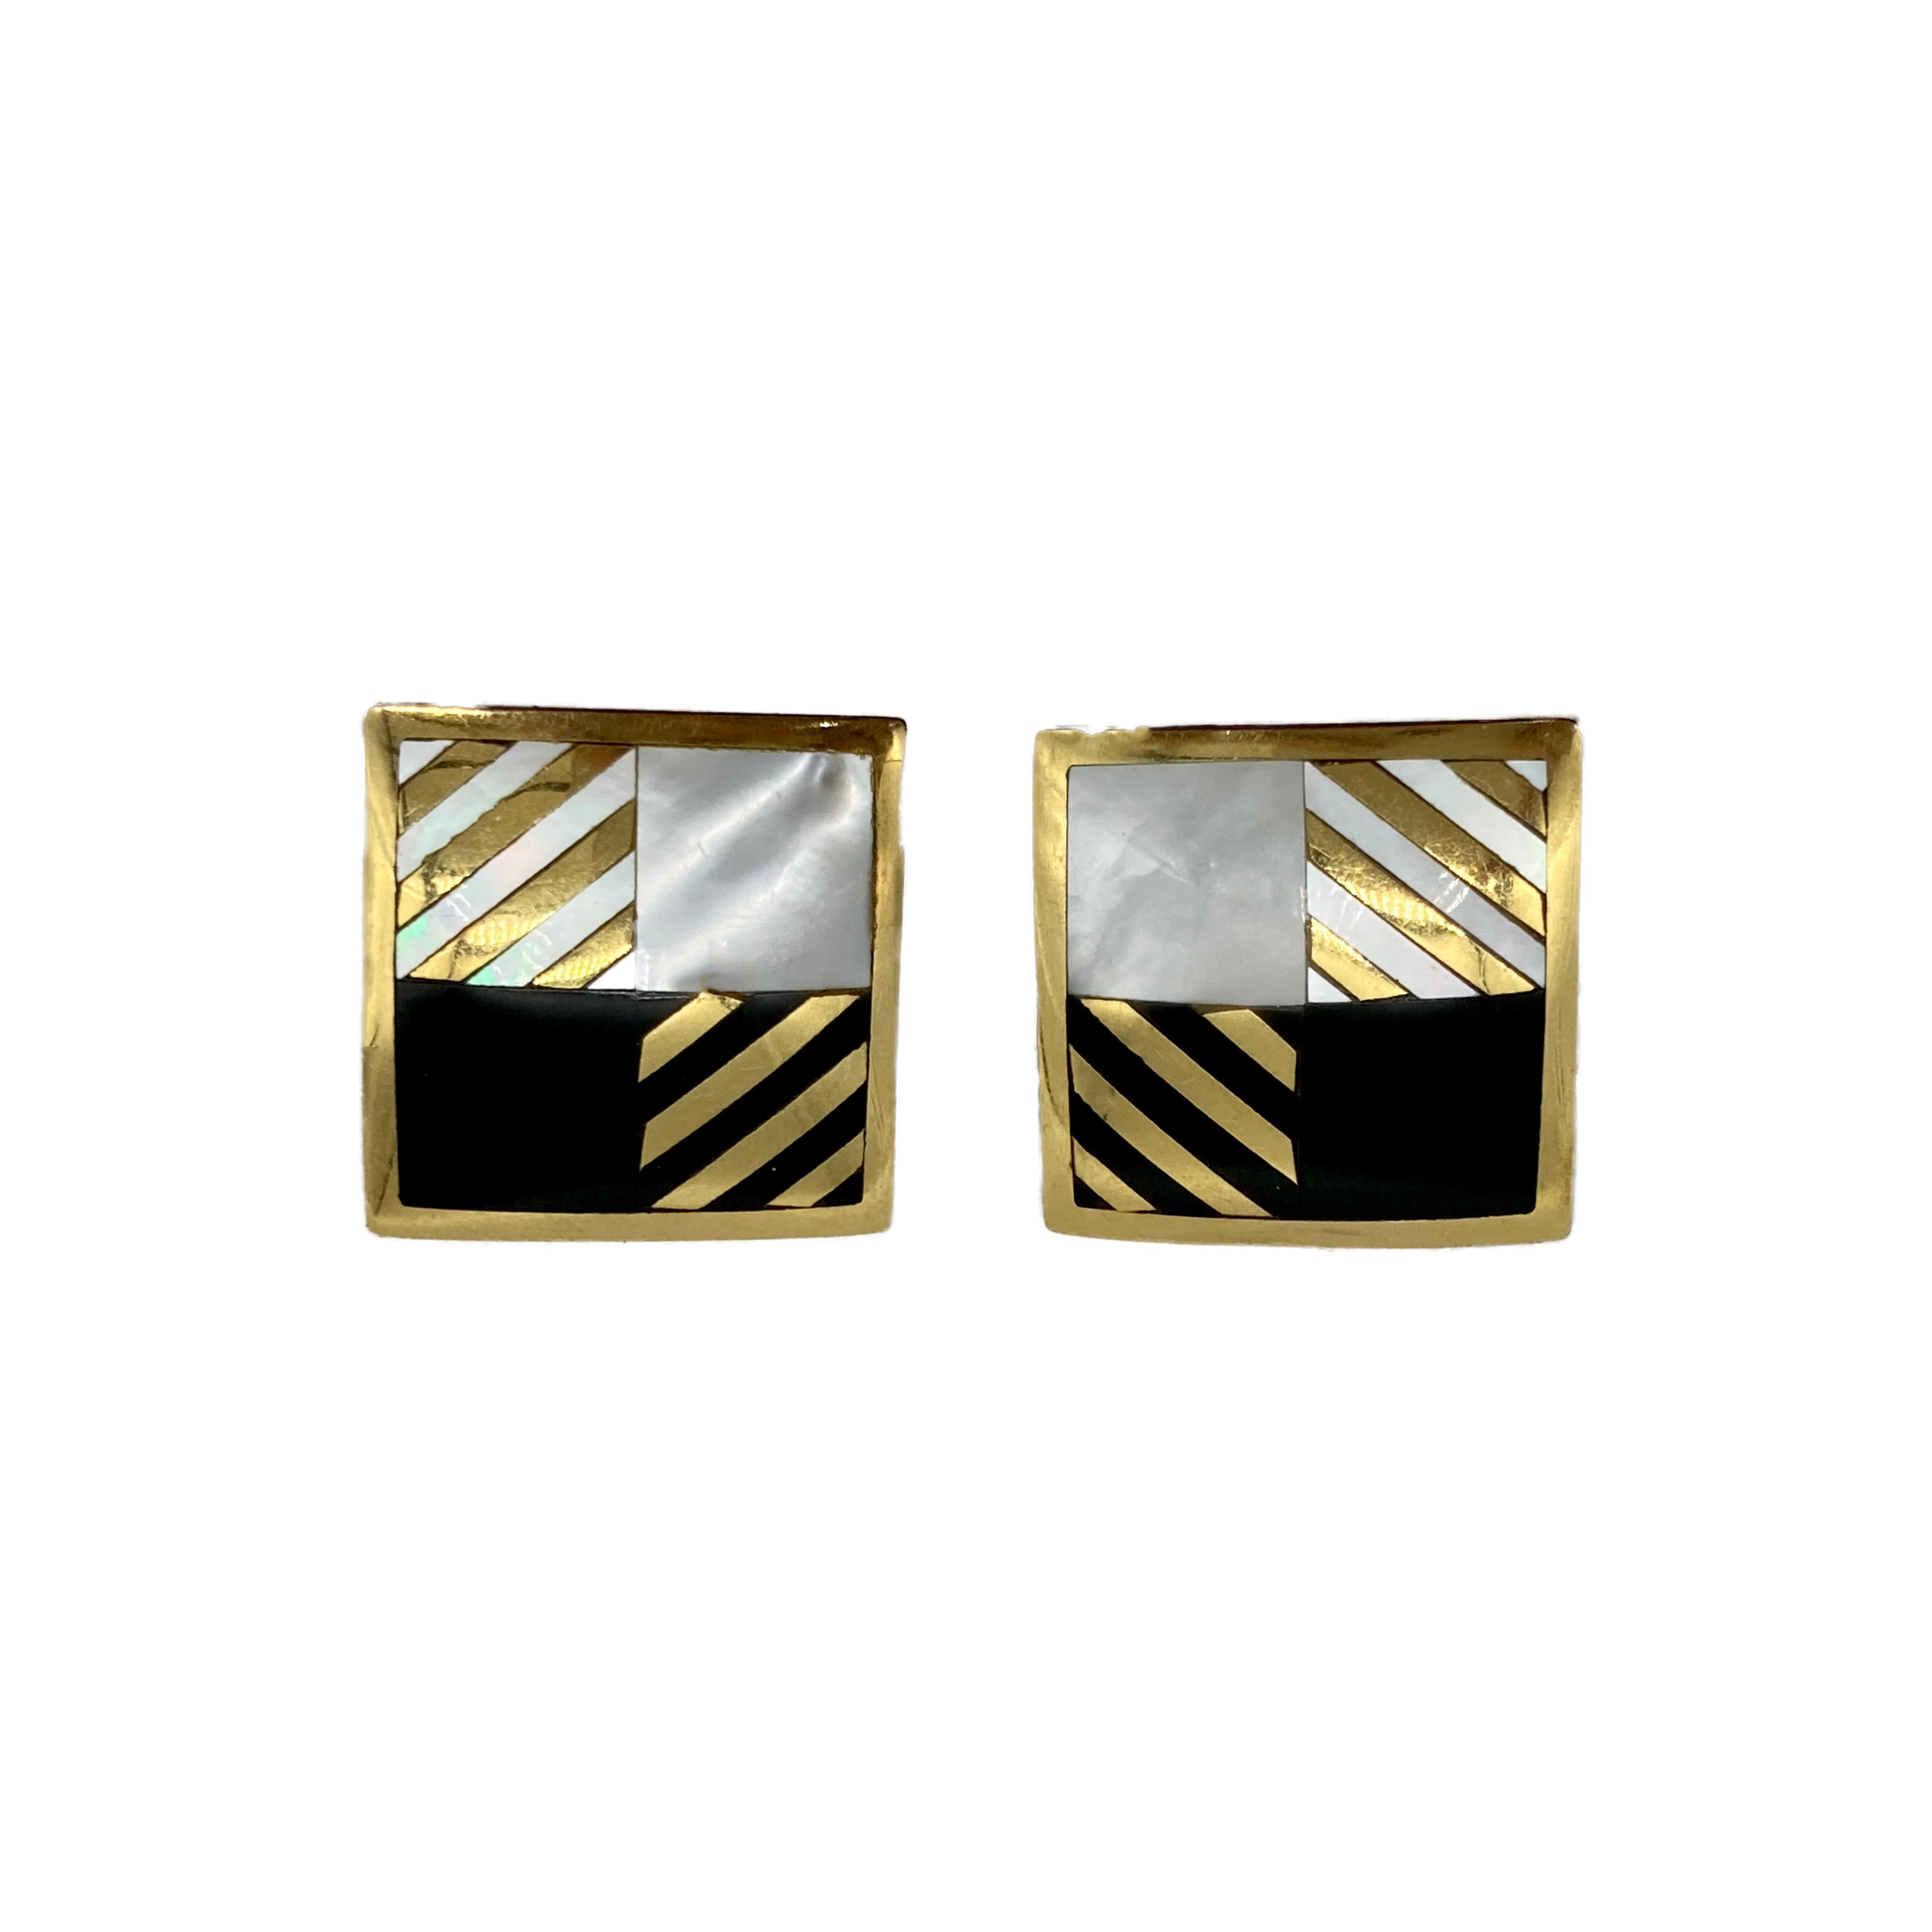 Tiffany & Co. Inlaid Mother of Pearl Earrings In Good Condition For Sale In New York, NY